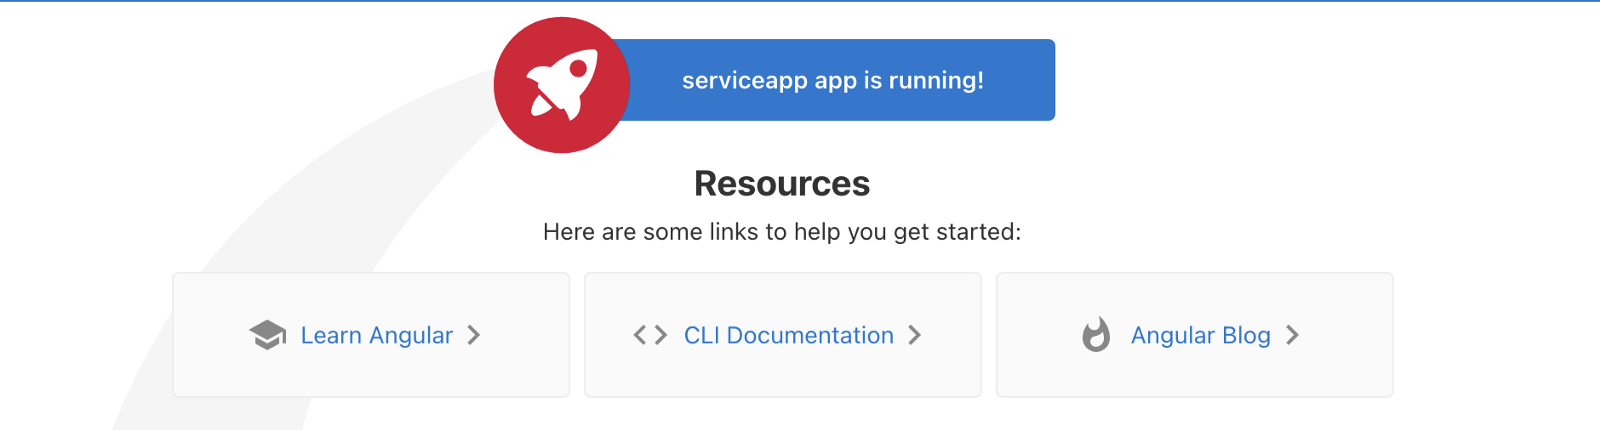 serviceapp.app is running! Resources. Here are some links to help you get started: Learn Angular, CLI Documentation, Angular Blog